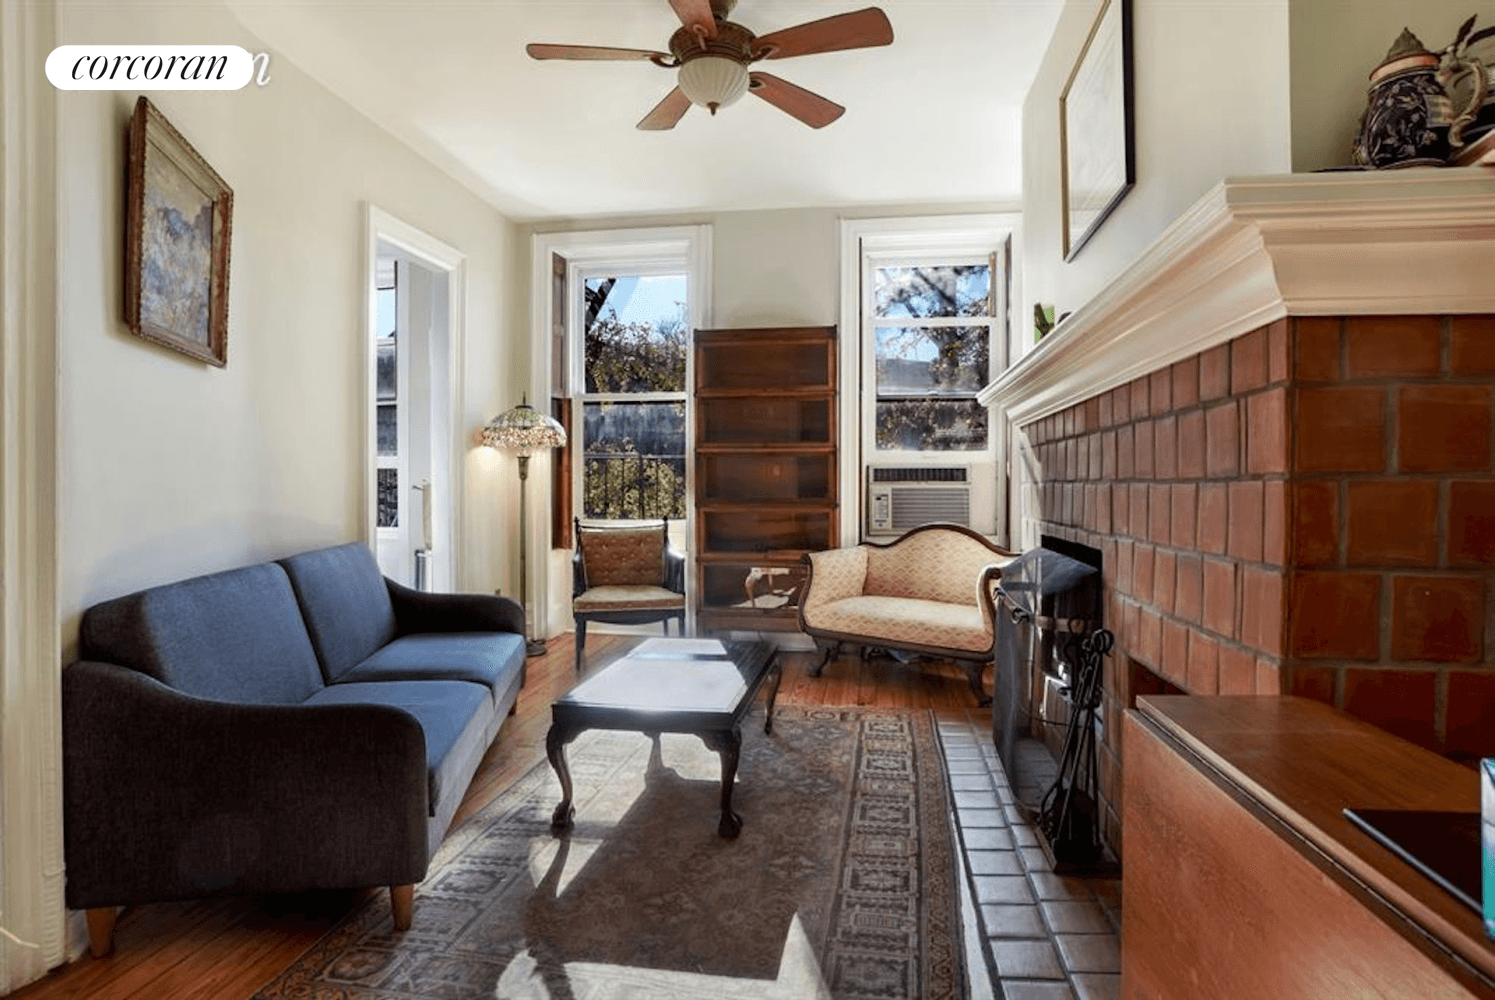 Nestled on tree lined 3rd street among beautiful brownstones you will find this perfect 1 bed 1 bath apartment with spacious light filled living room, hardwood floors throughout, updated kitchen, ...